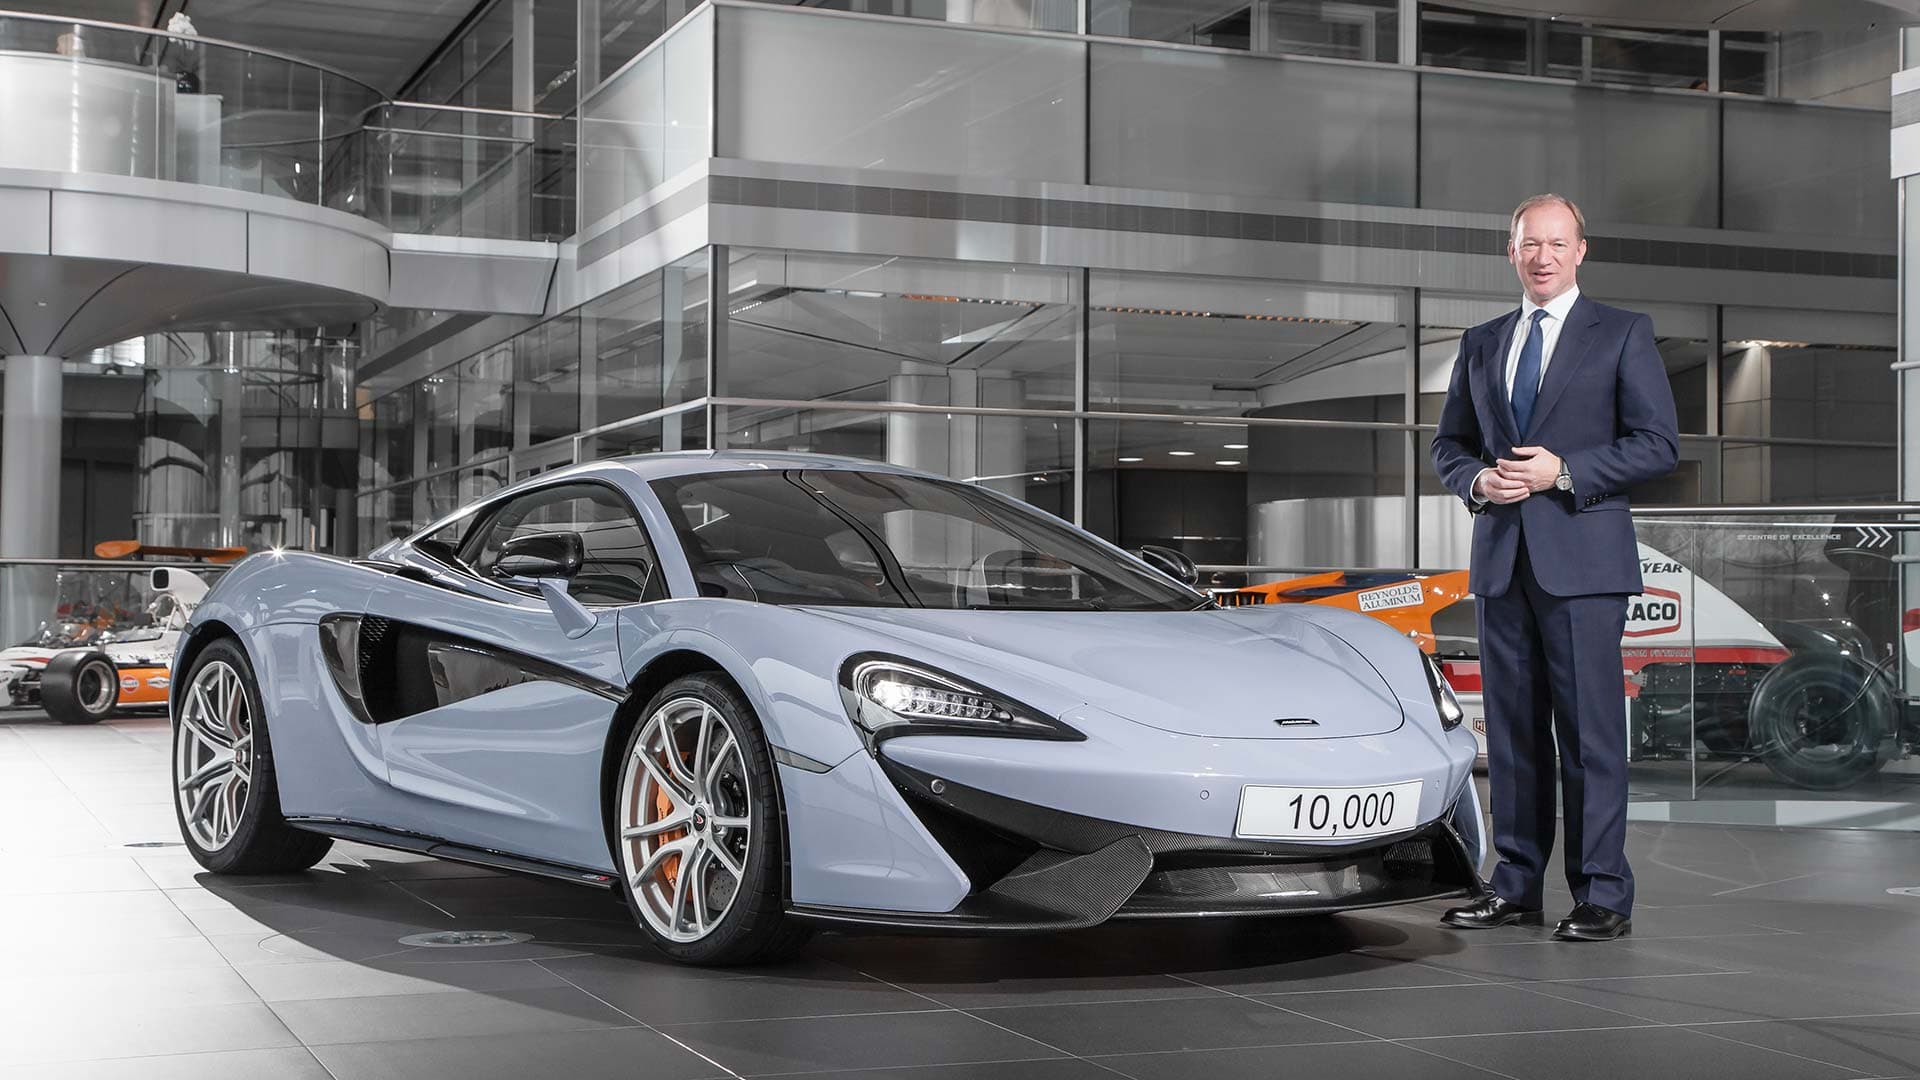 McLaren Builds Its 10,000th Car and BMW X7 Spy Shots Emerge: The Evening Rush